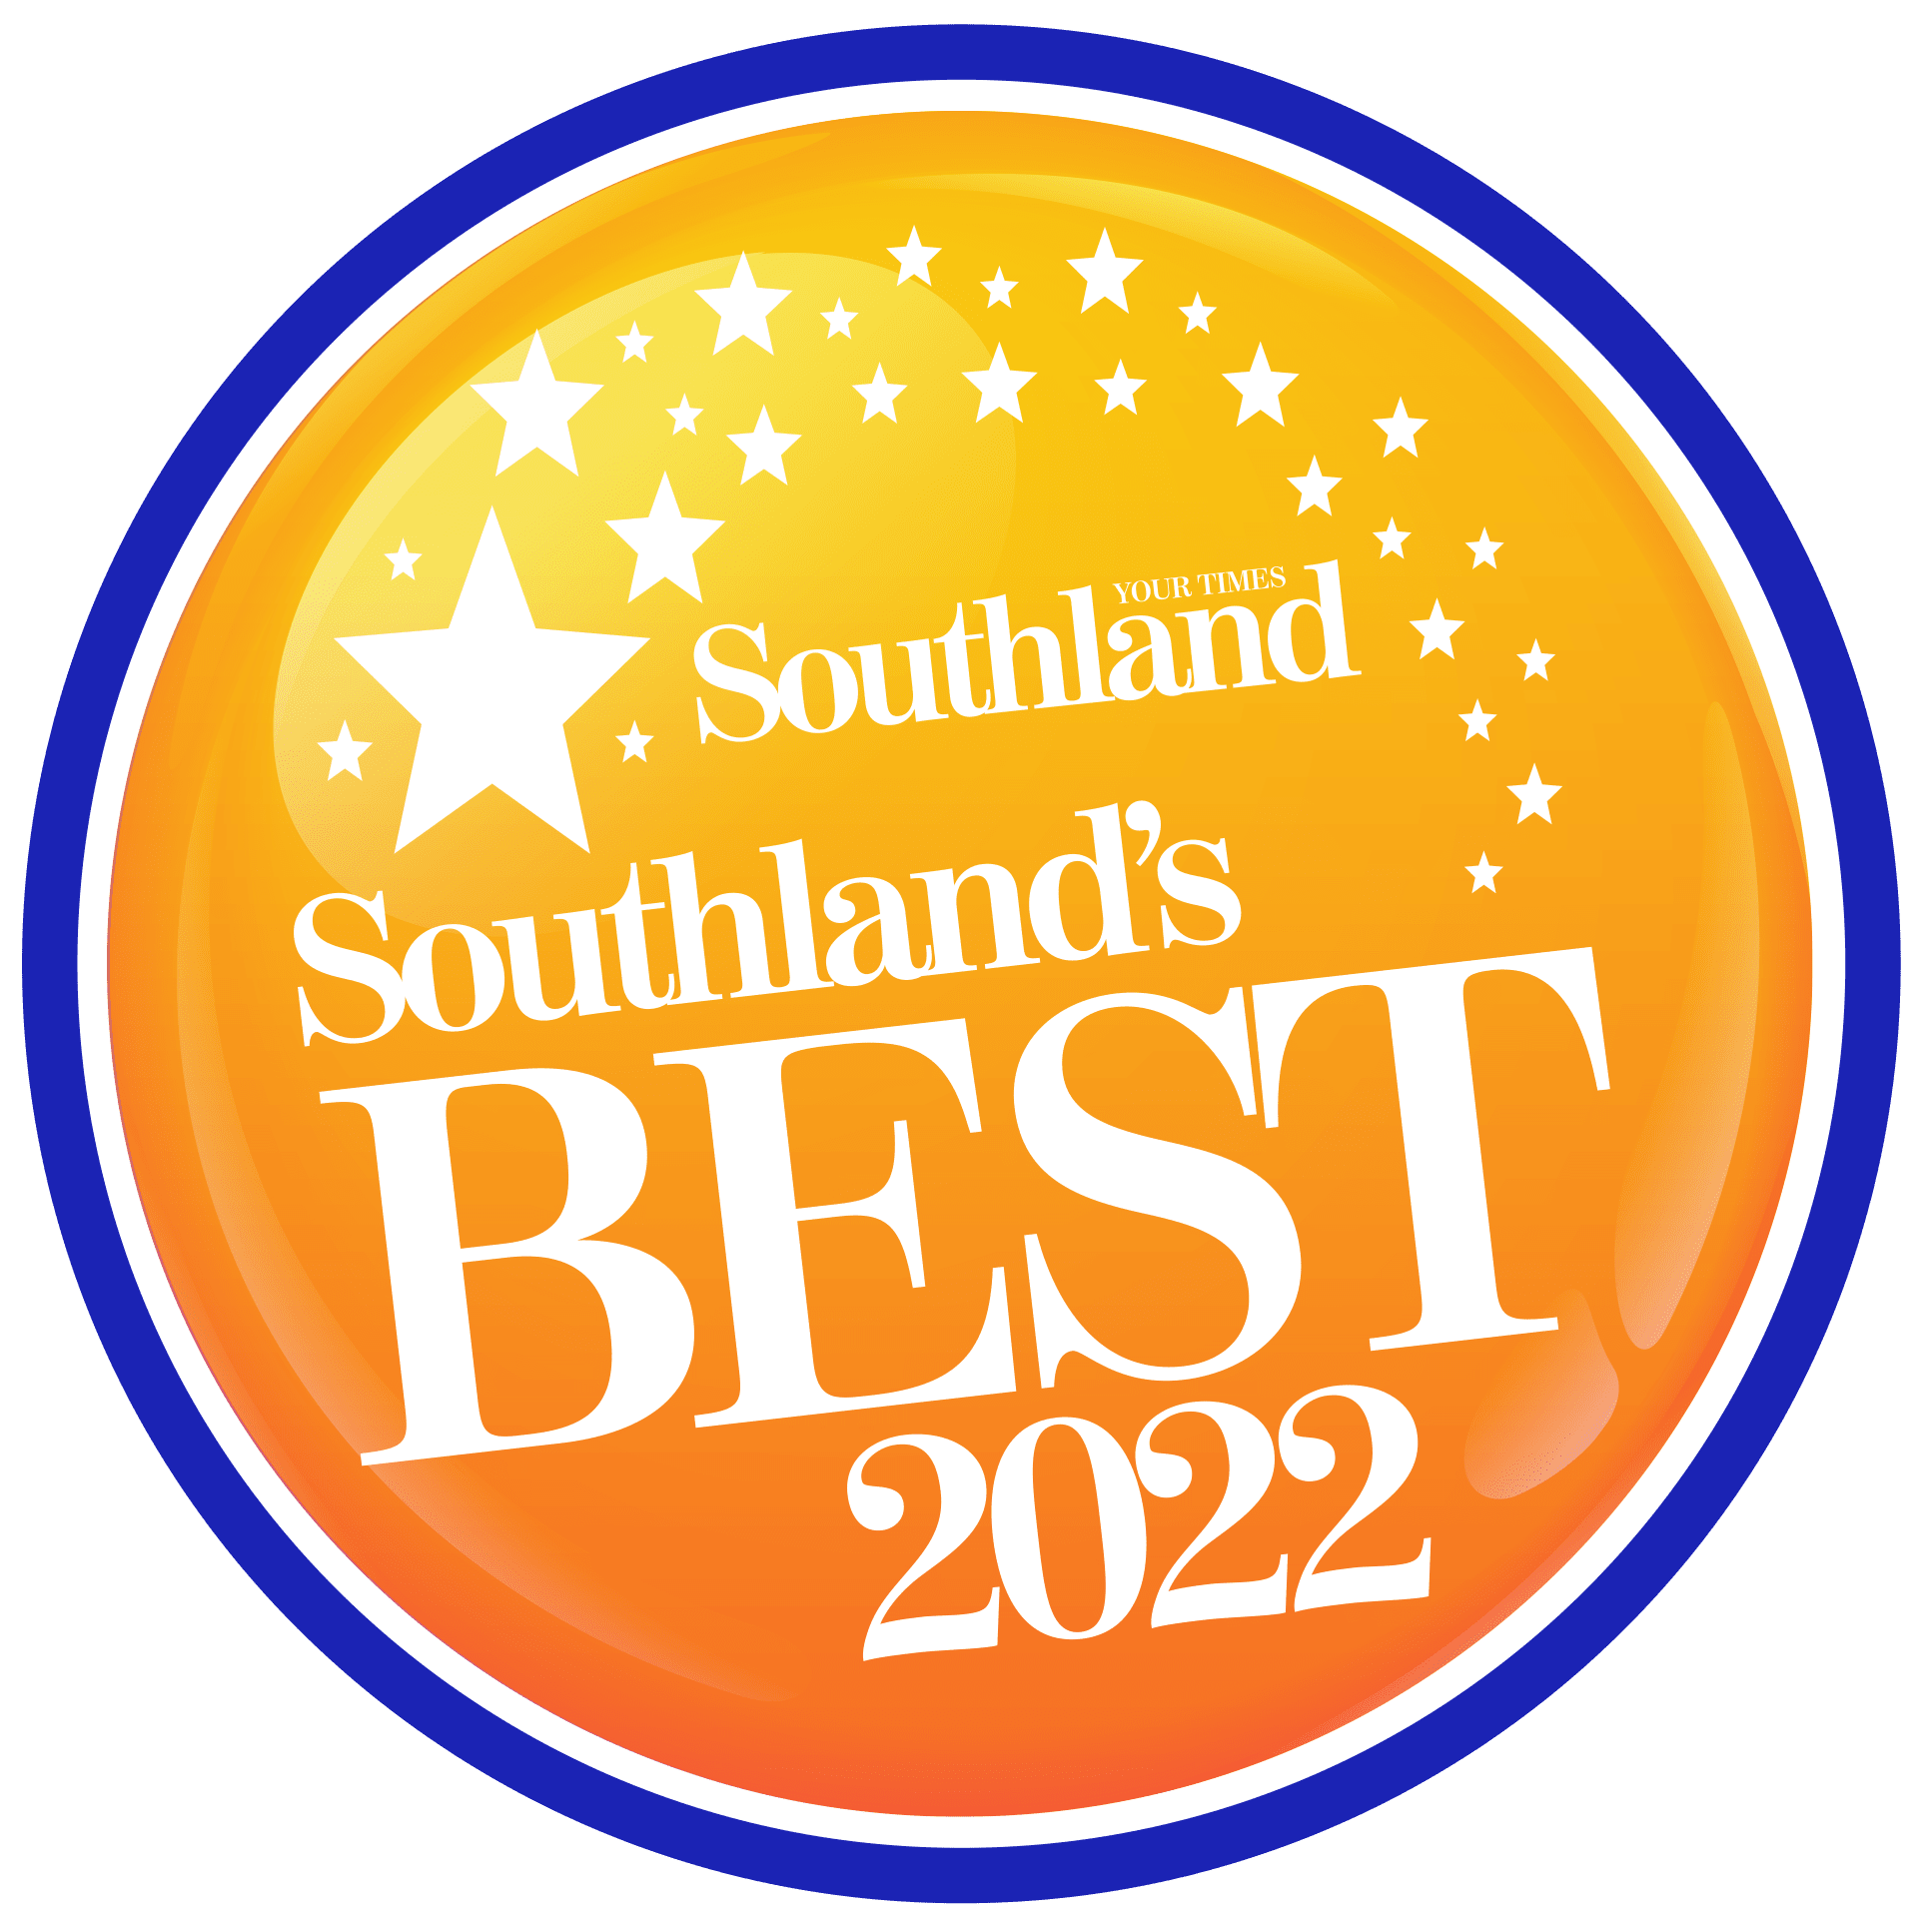 Southland Best 2022